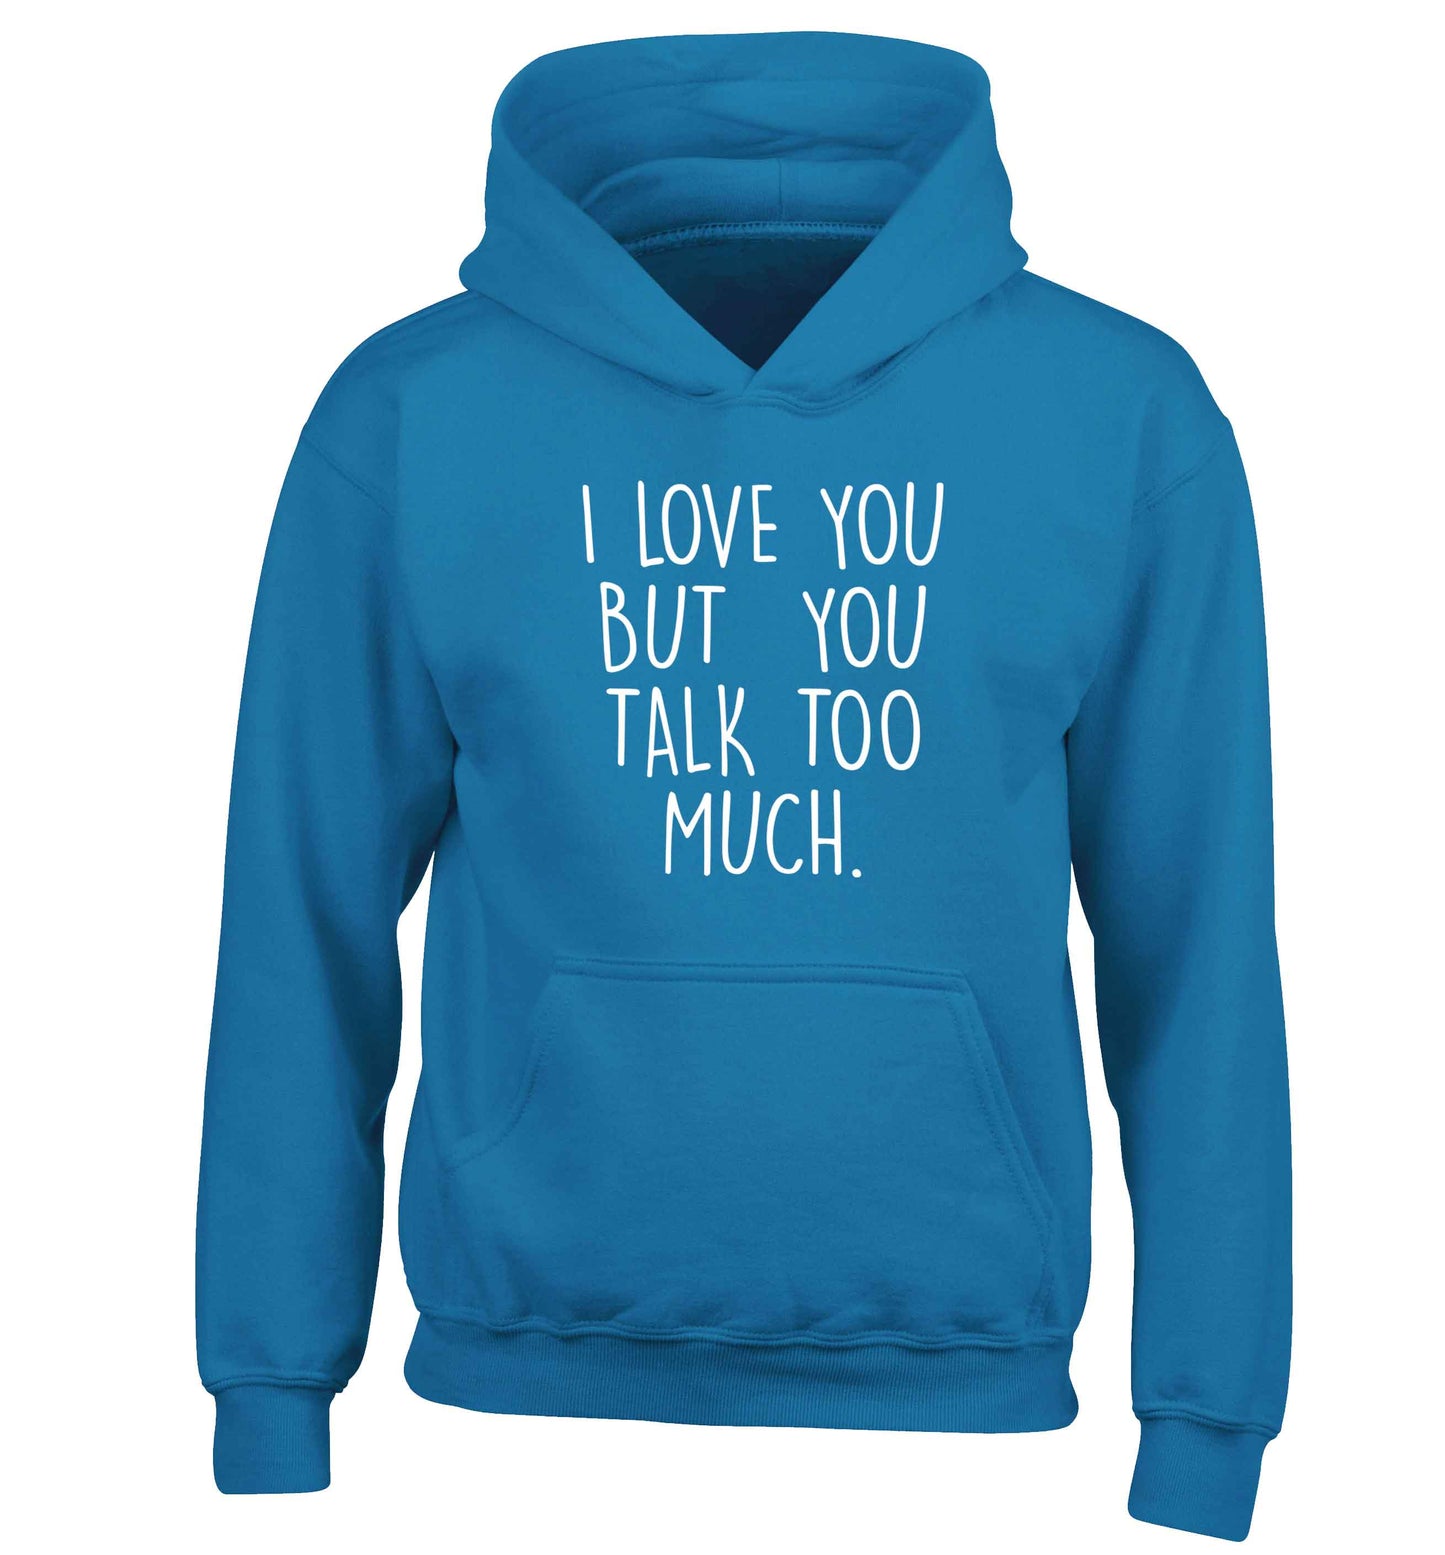 I love you but you talk too much children's blue hoodie 12-13 Years